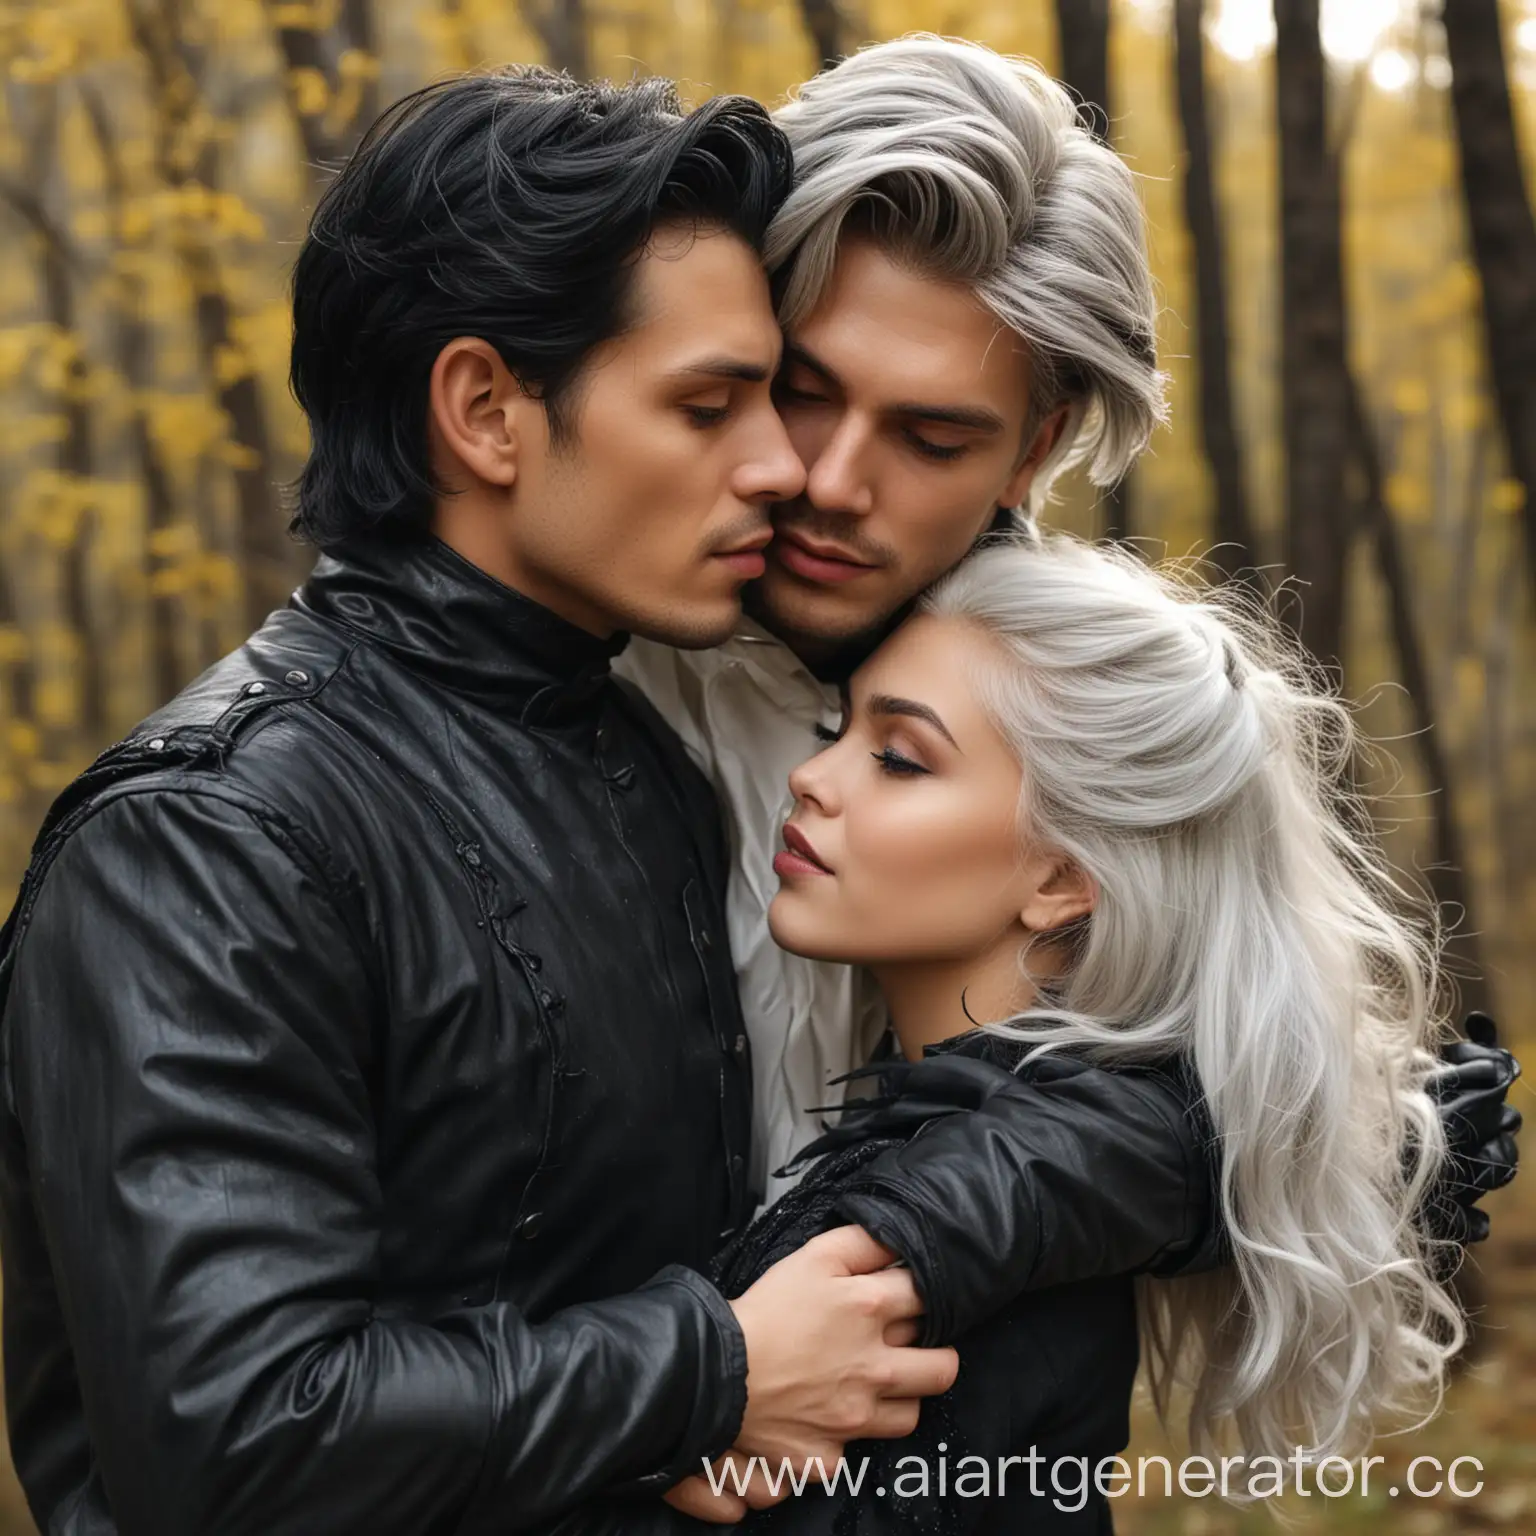 Gallant-Age-Handsome-Man-Embracing-Beautiful-Young-Witch-in-Forest-Scene